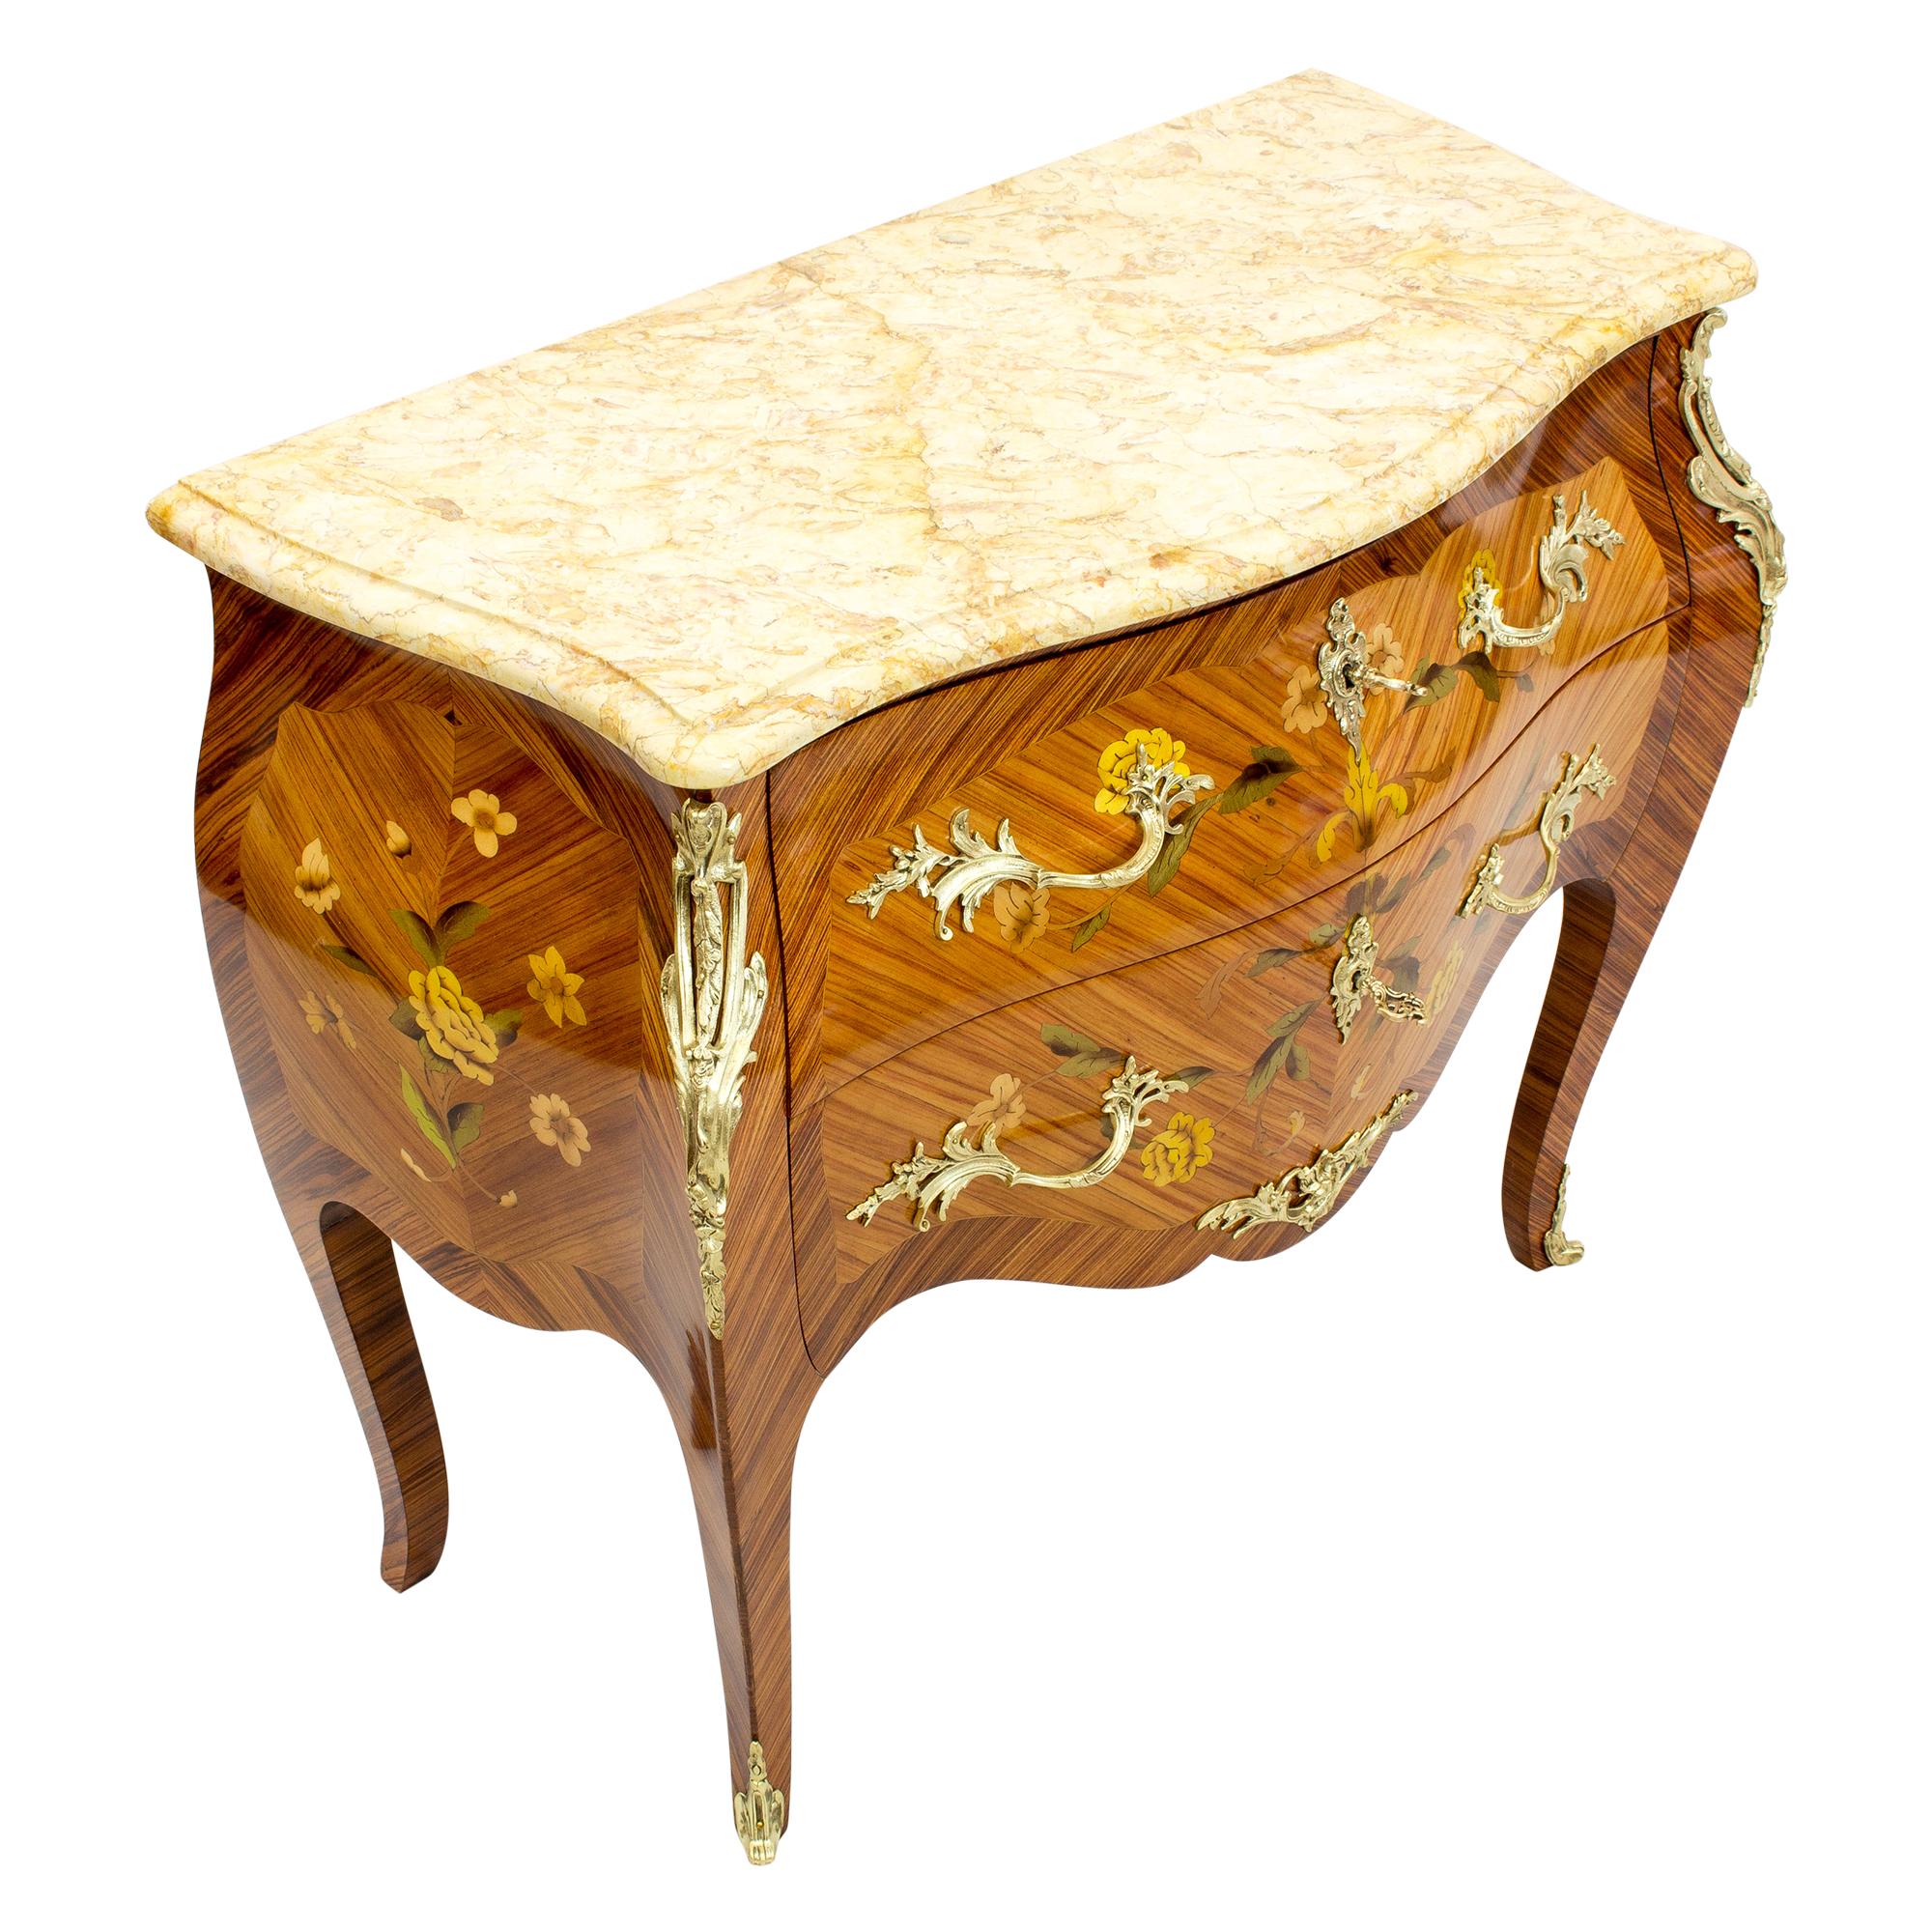 Fine French late 19th century Louis XV style around 1890 fruitwood floral marquetry and bronze mounted two drawer bombe petit commode. 
The serpentine shaped chest of two drawers, each with a pair of scrolled floral handles and a marquetry floral